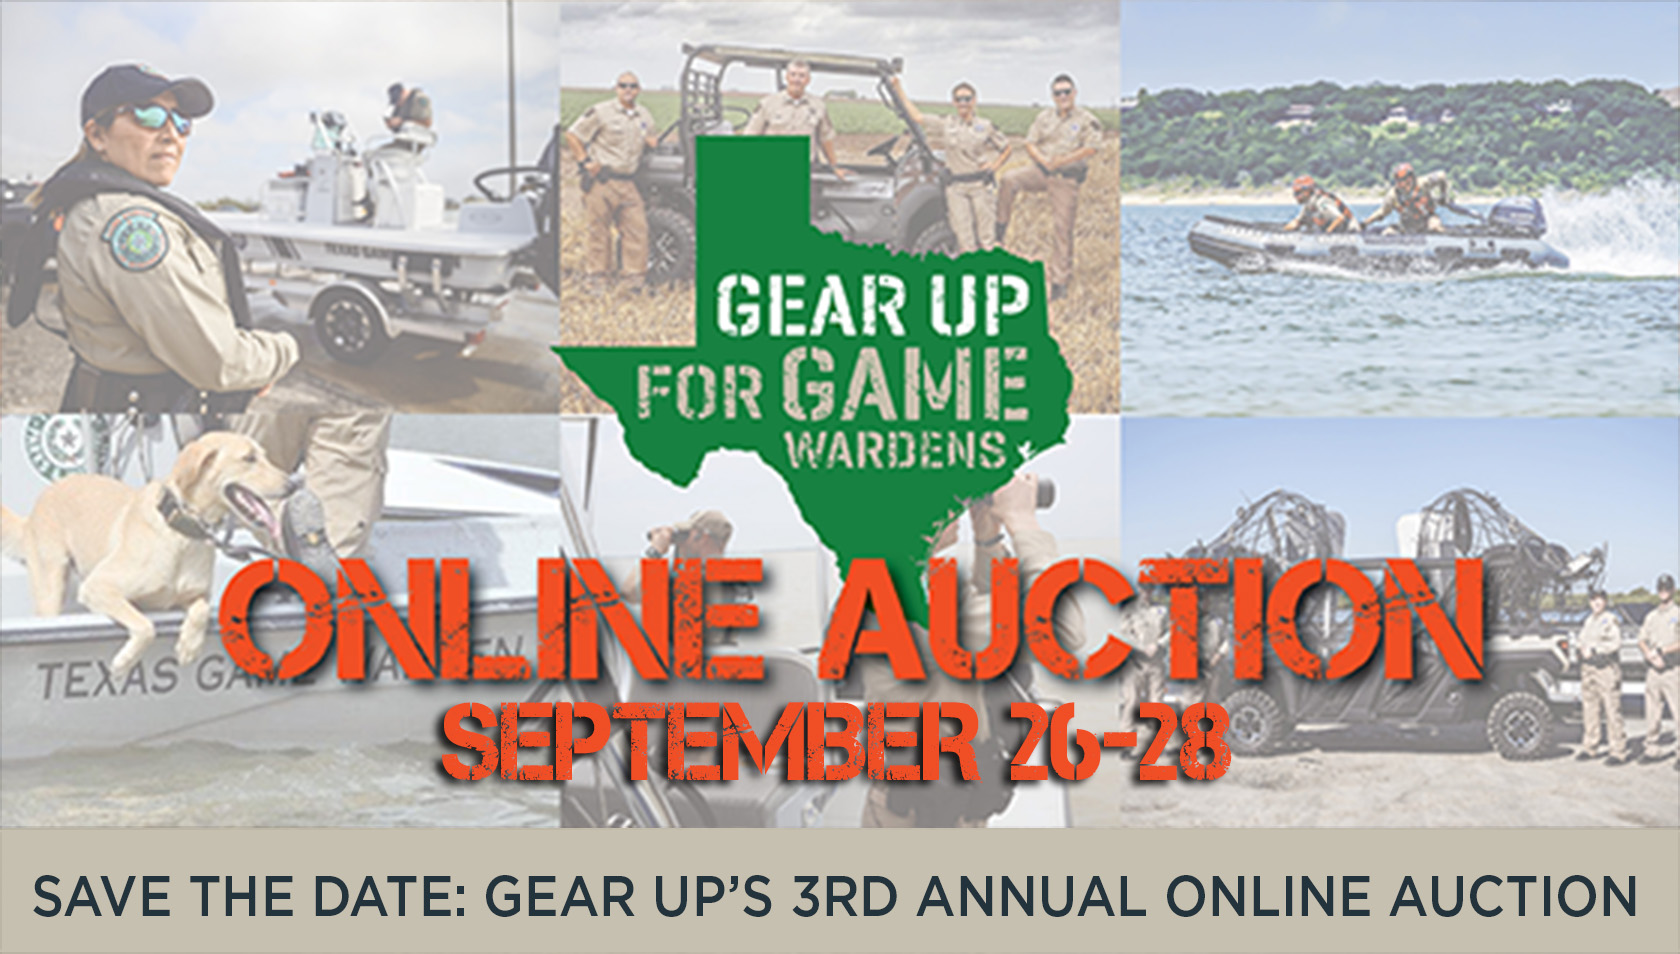 Story #4: SAVE THE DATE for Gear Up’s Online Auction!